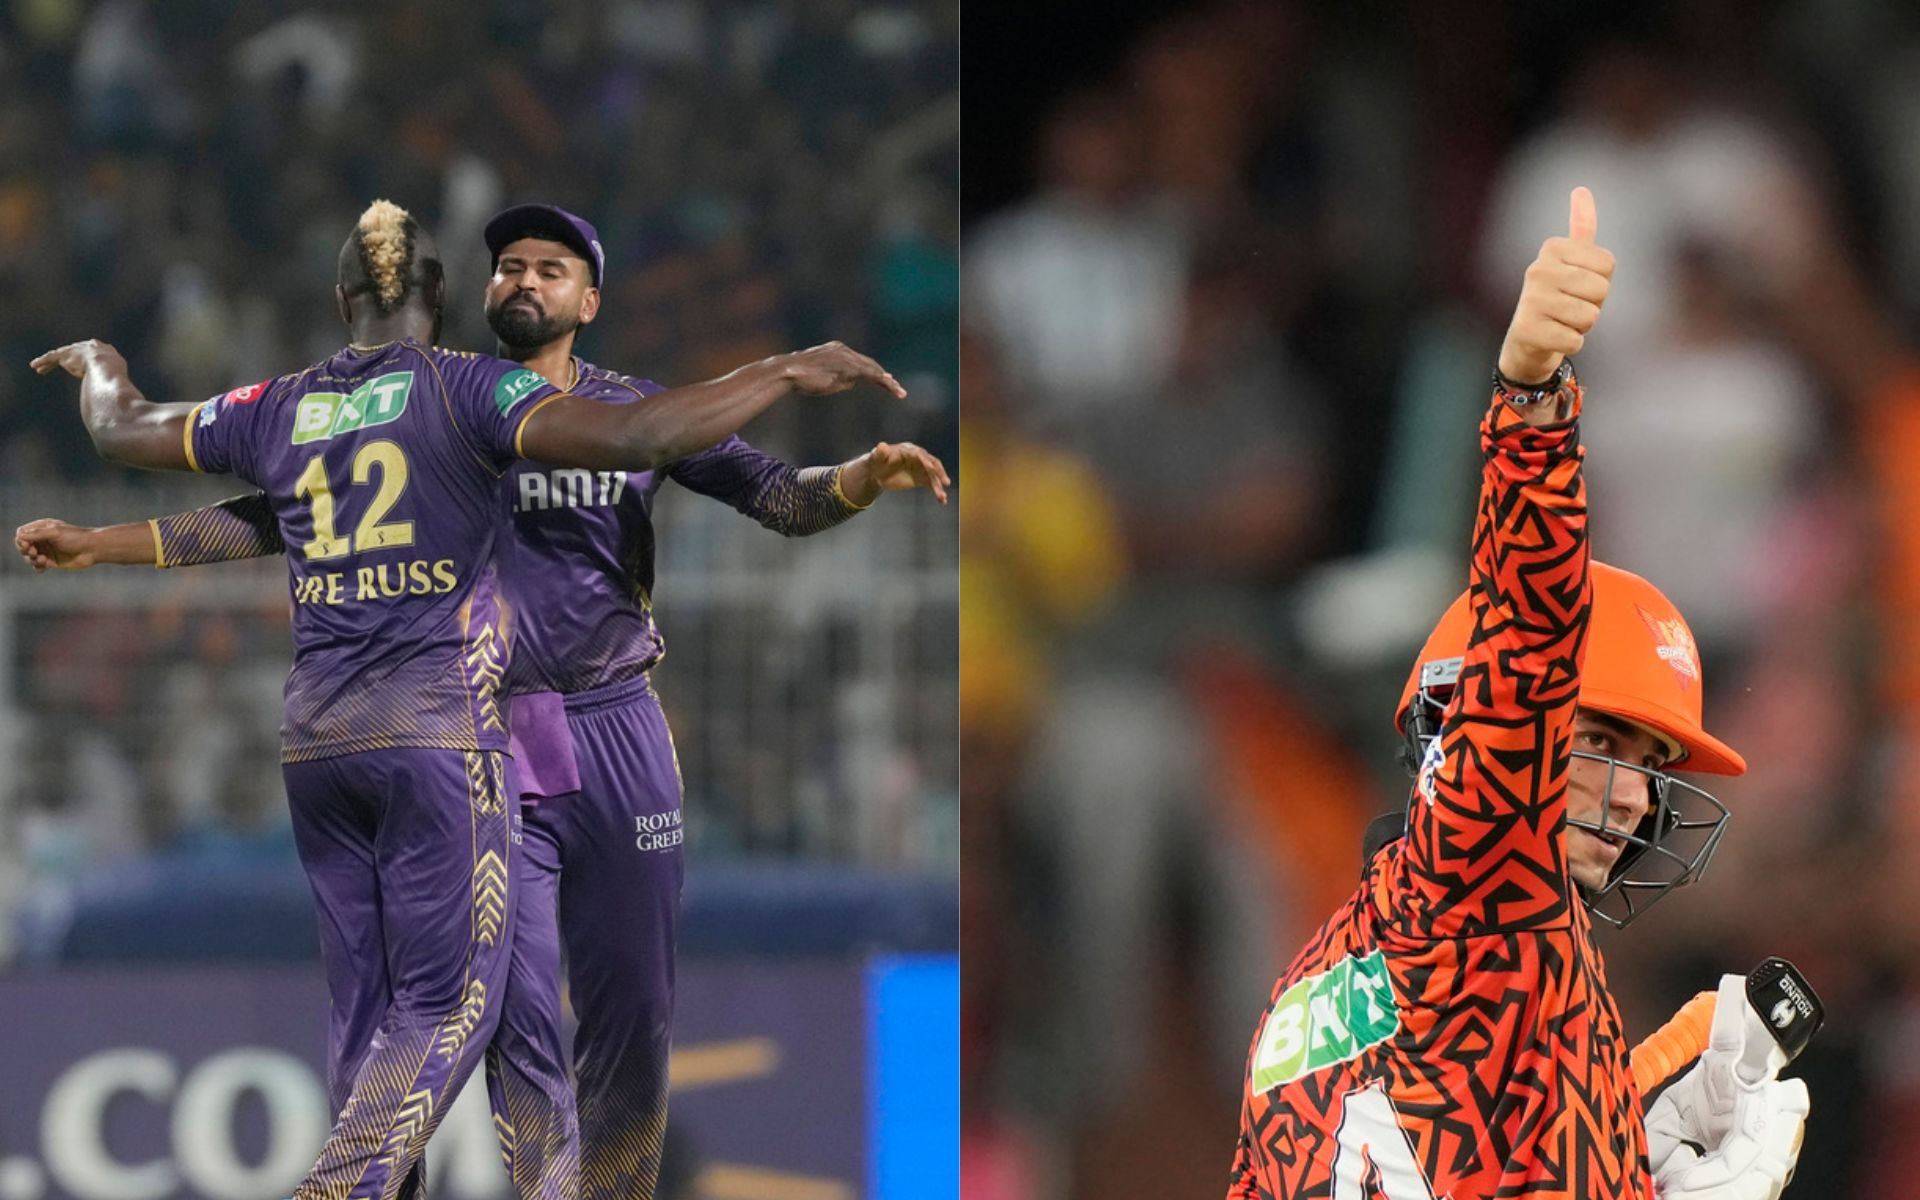 Russell To Clean Up Abhishek; 3 Player Battles To Watch Out For In KKR Vs SRH Qualifier 1